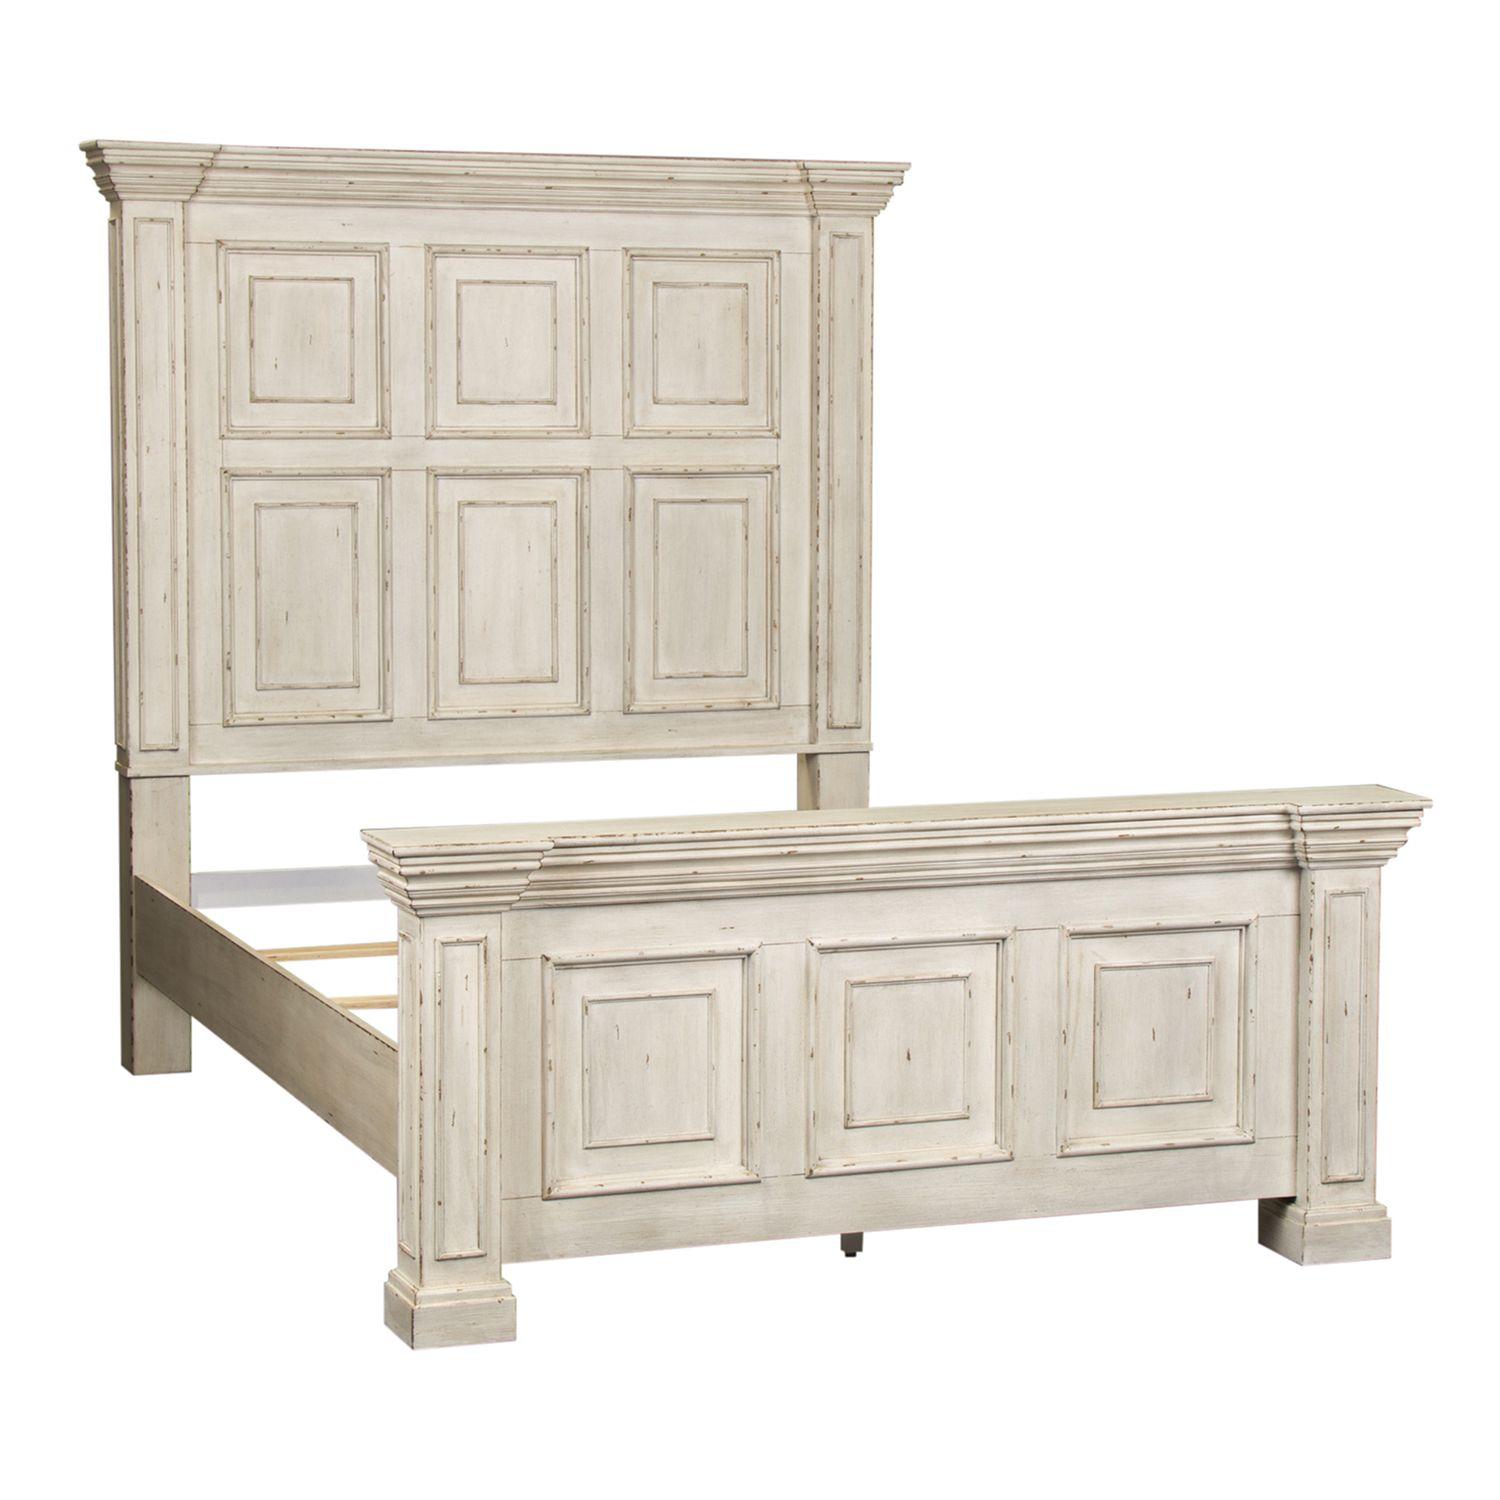 https://nyfurnitureoutlets.com/products/whitestone-finish-queen-bed-set-4-w-chest-big-valley-361w-br-liberty-furniture/1x1/569248-2-033211190201.jpg